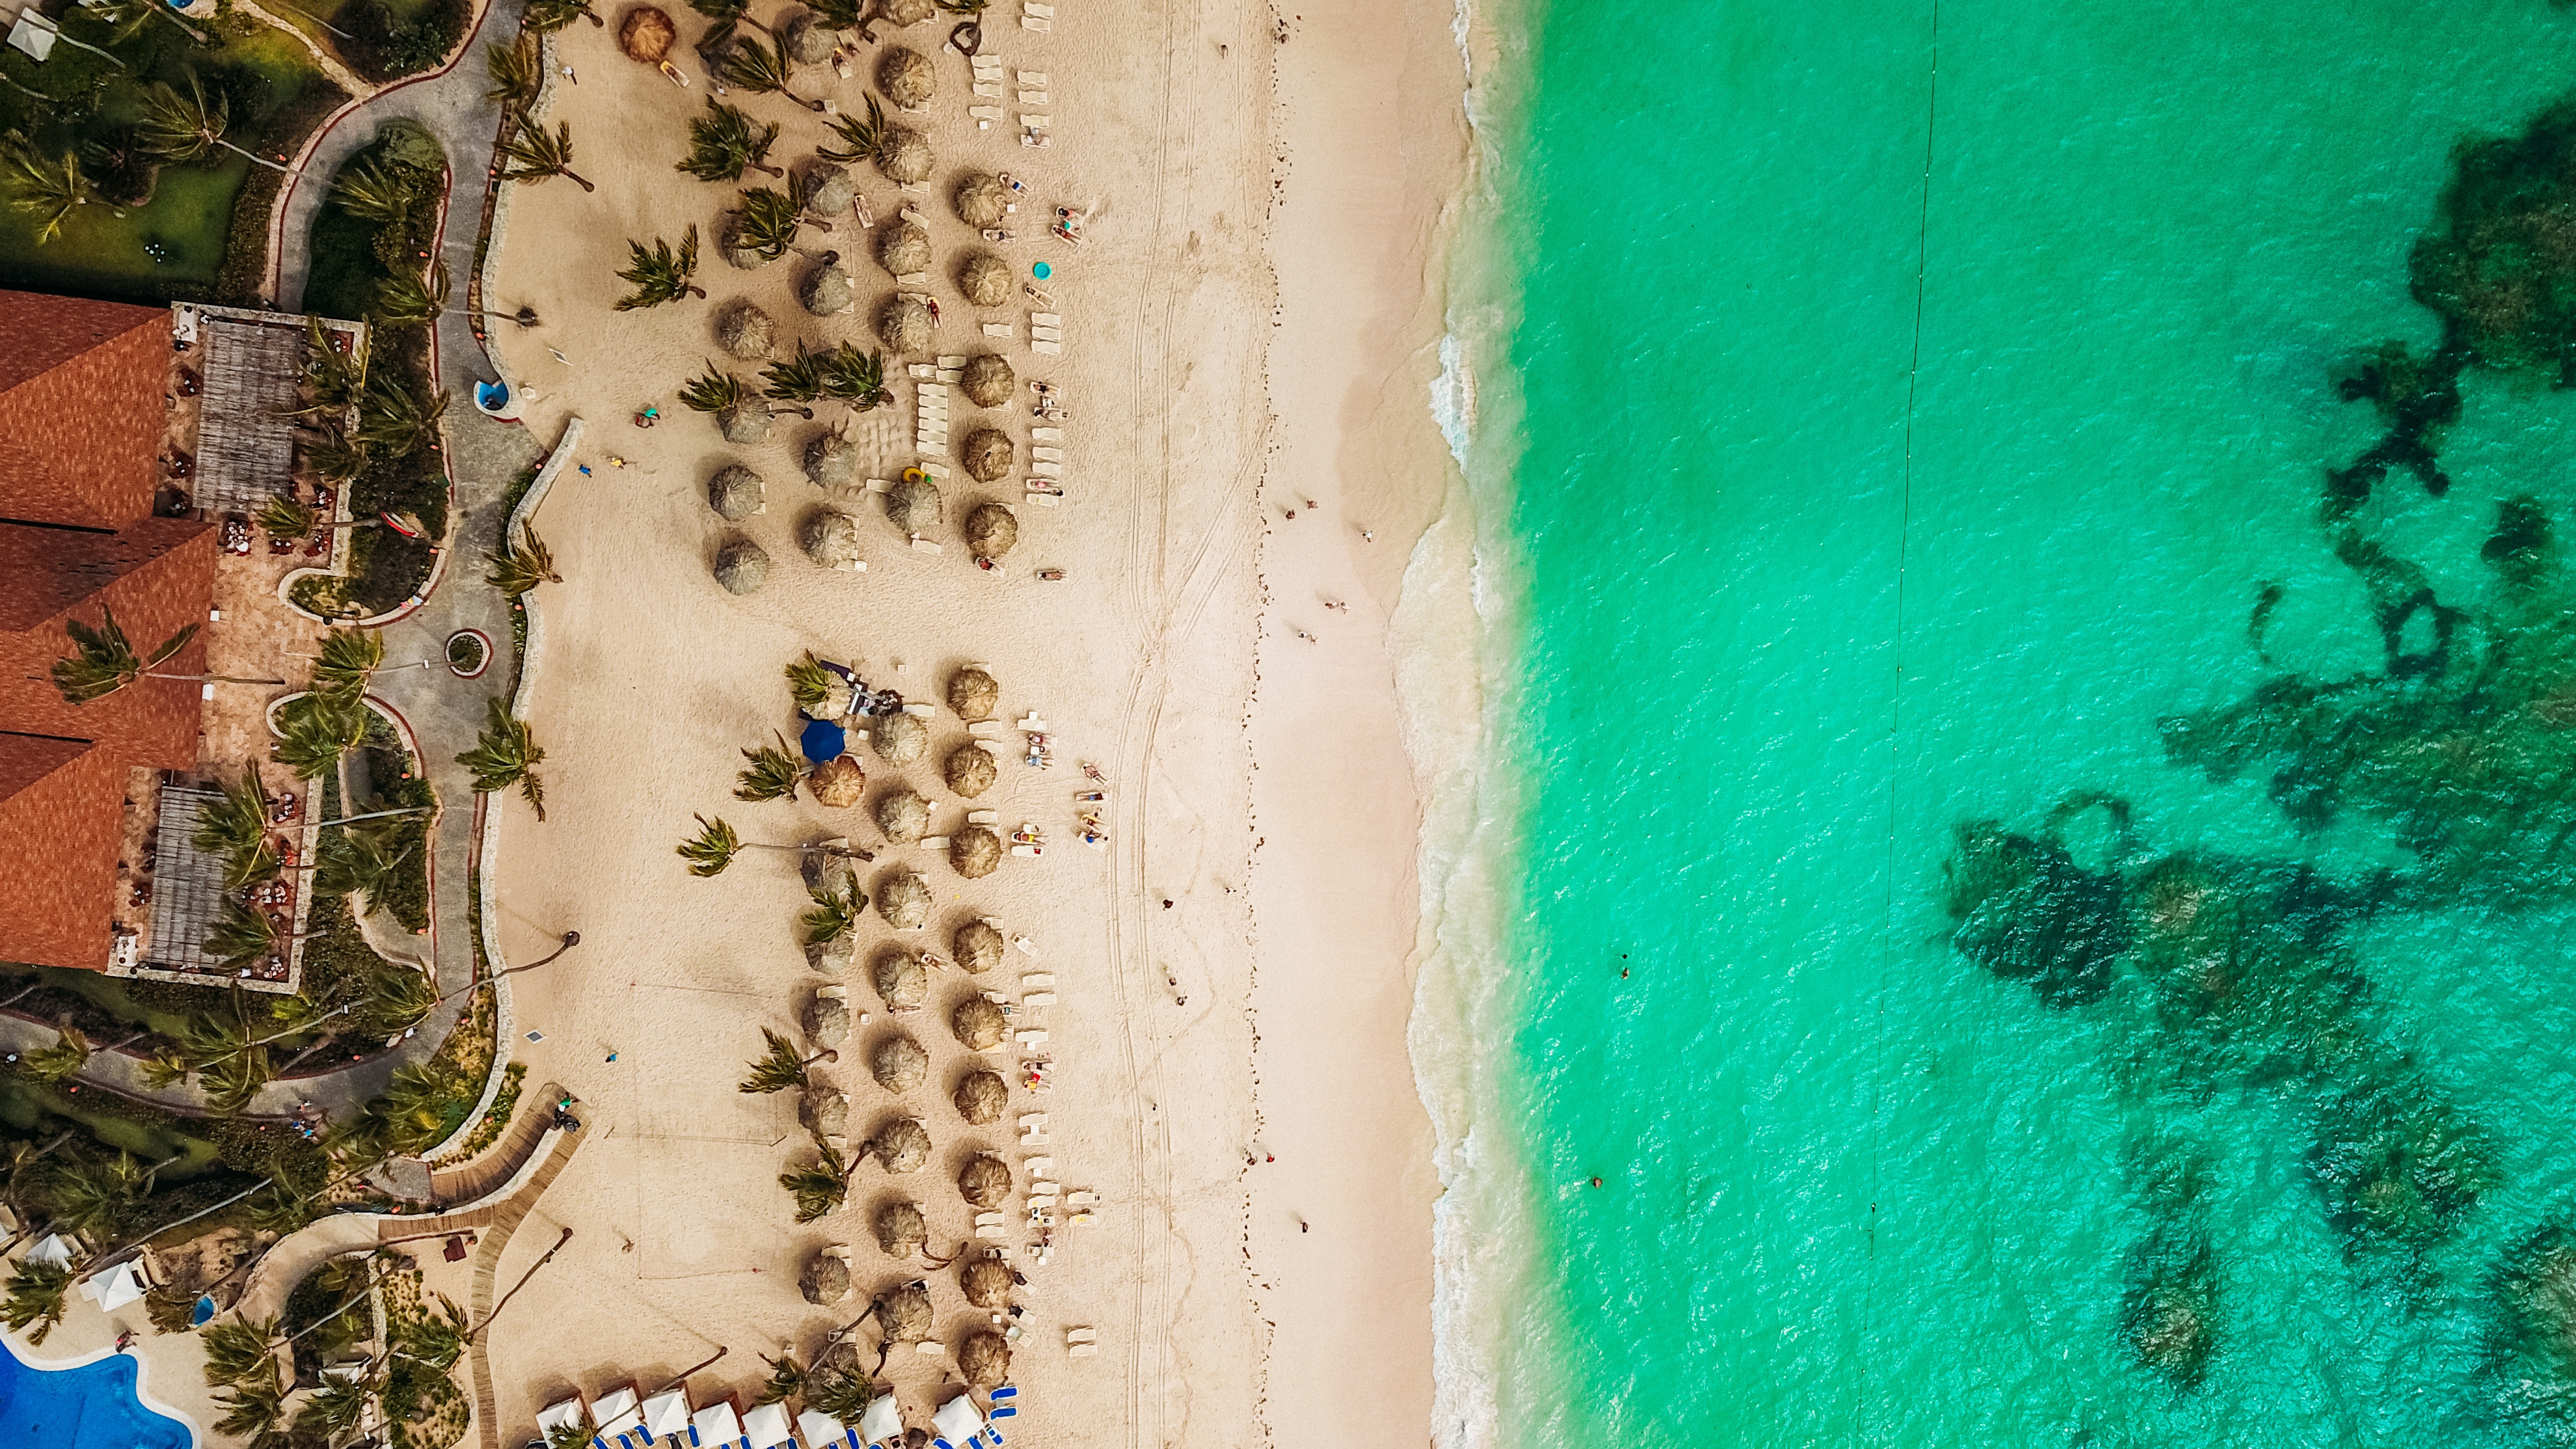 Flight Deal: Fly To Punta Cana From Atlanta For As Low As $265